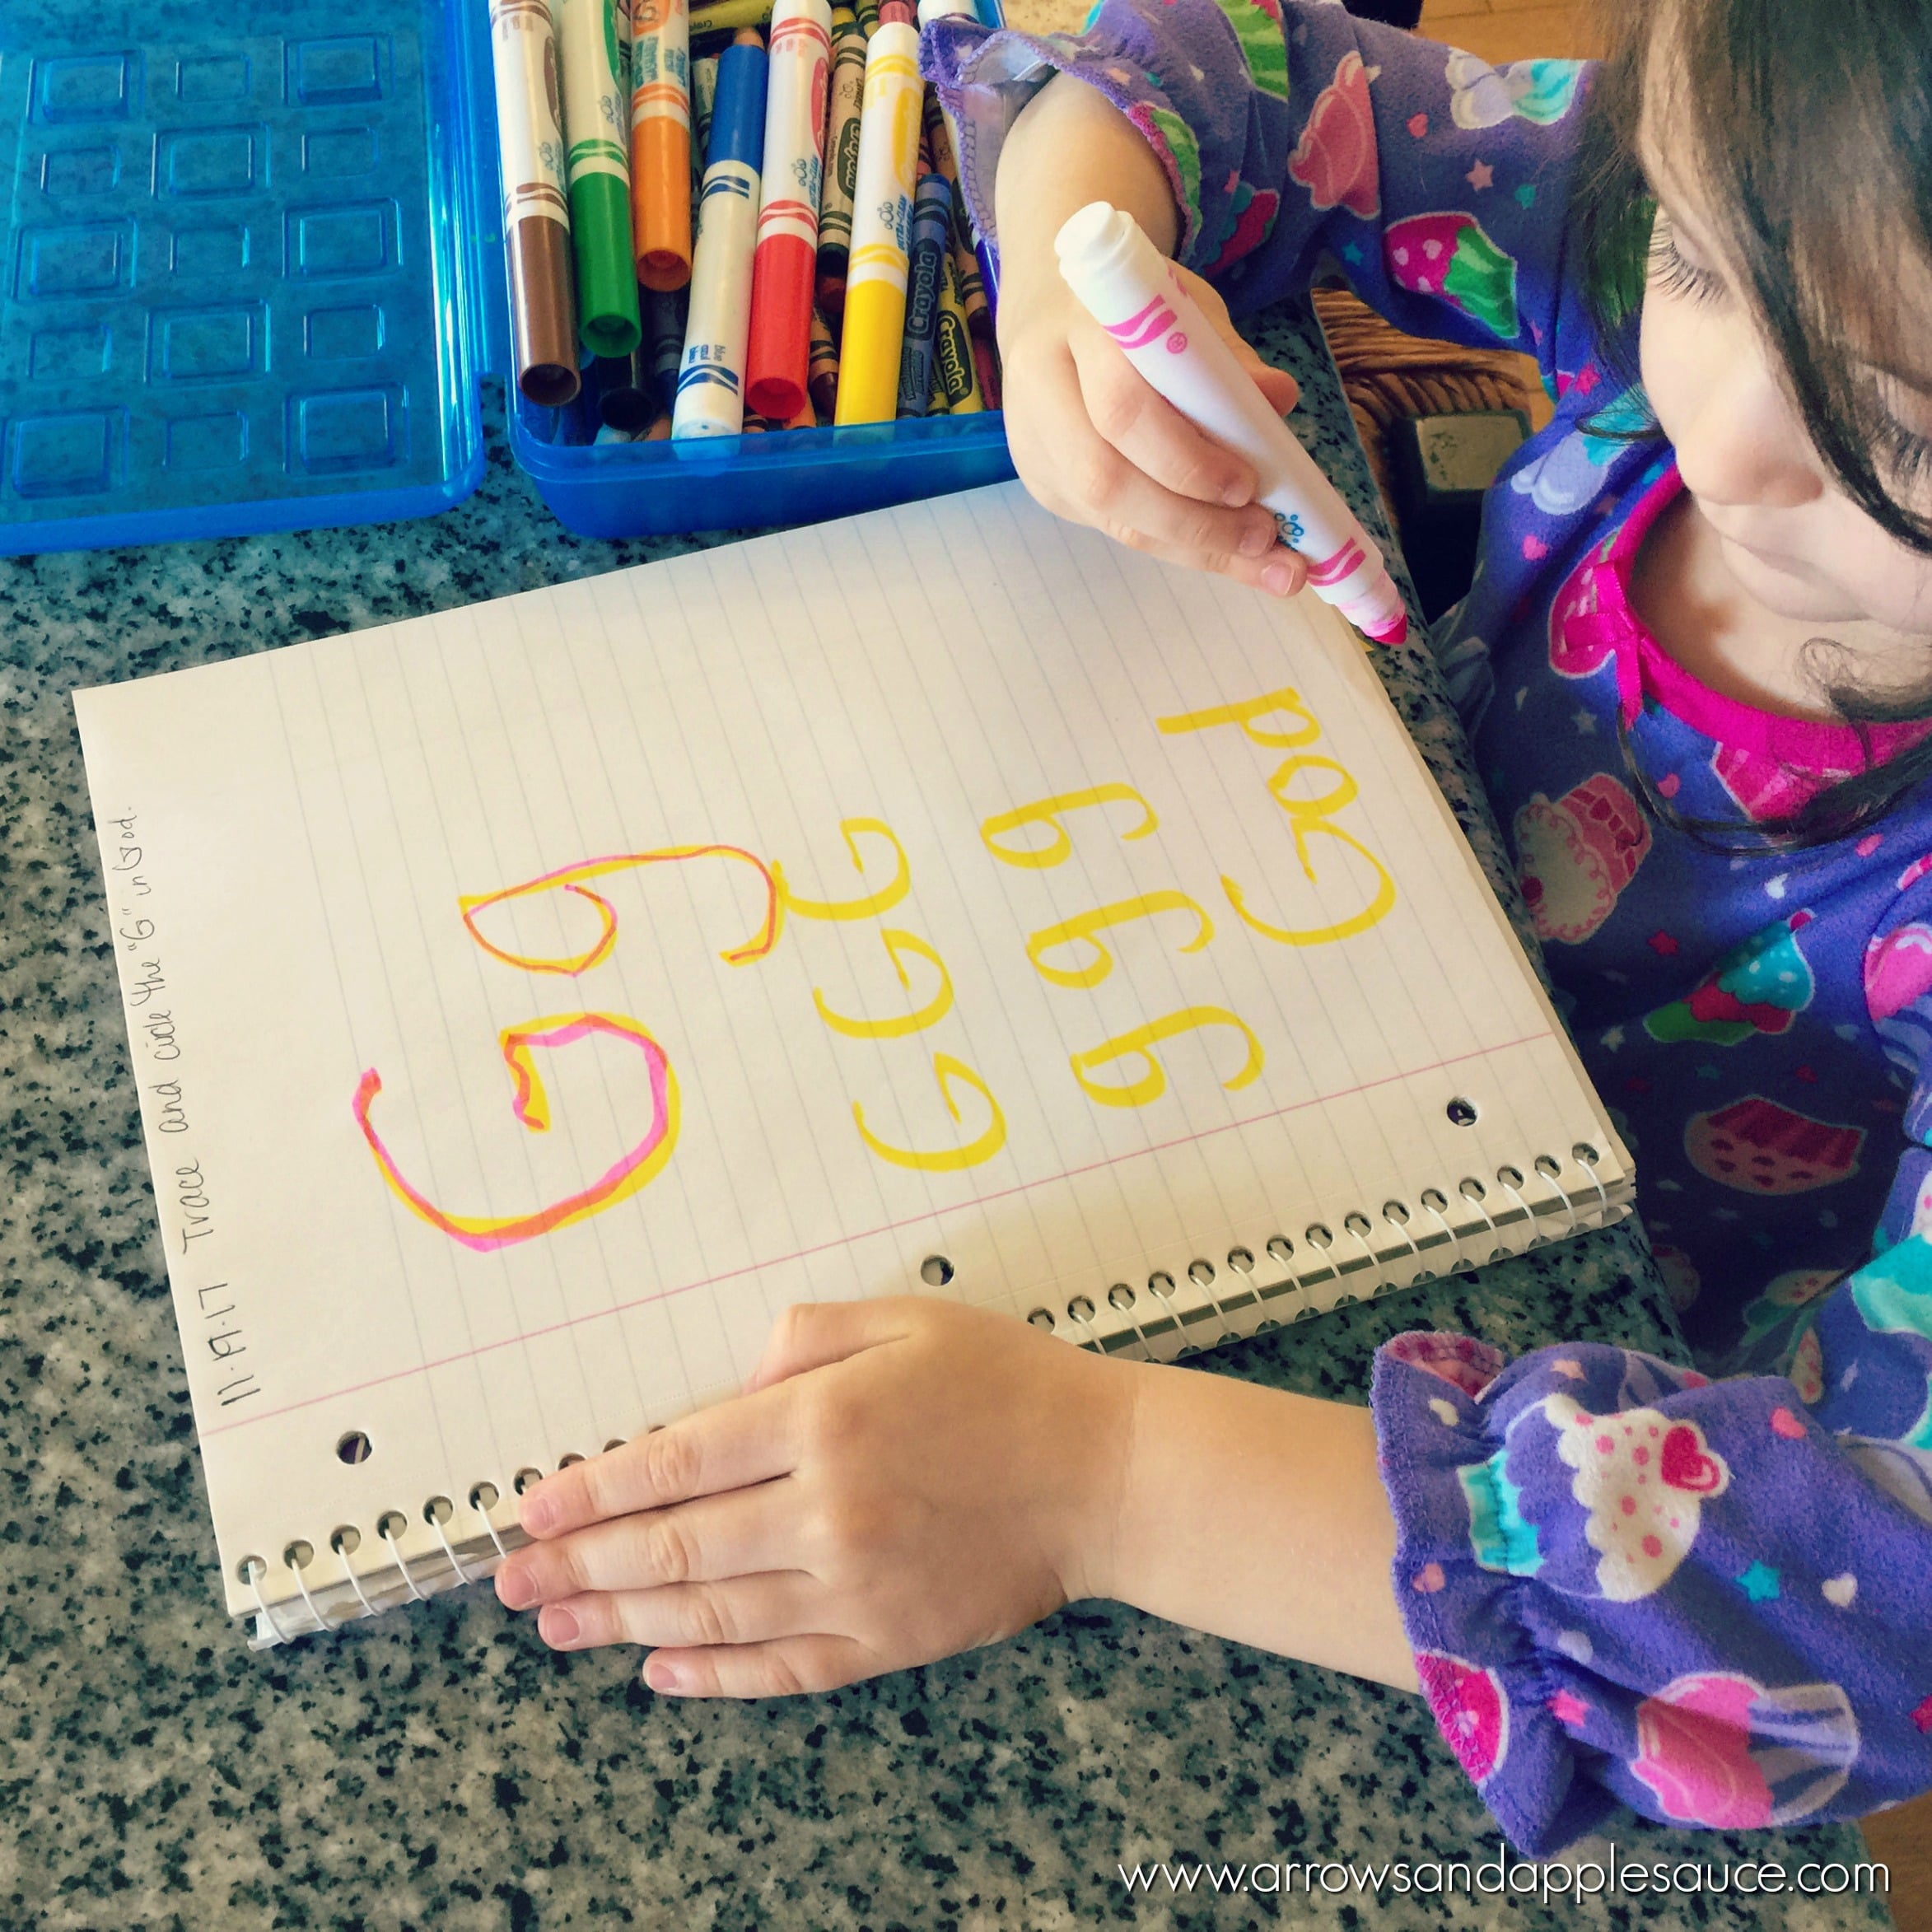 Fun and creative ideas for your little ones preschool journal. Alphabet, number, shapes, and color practice.